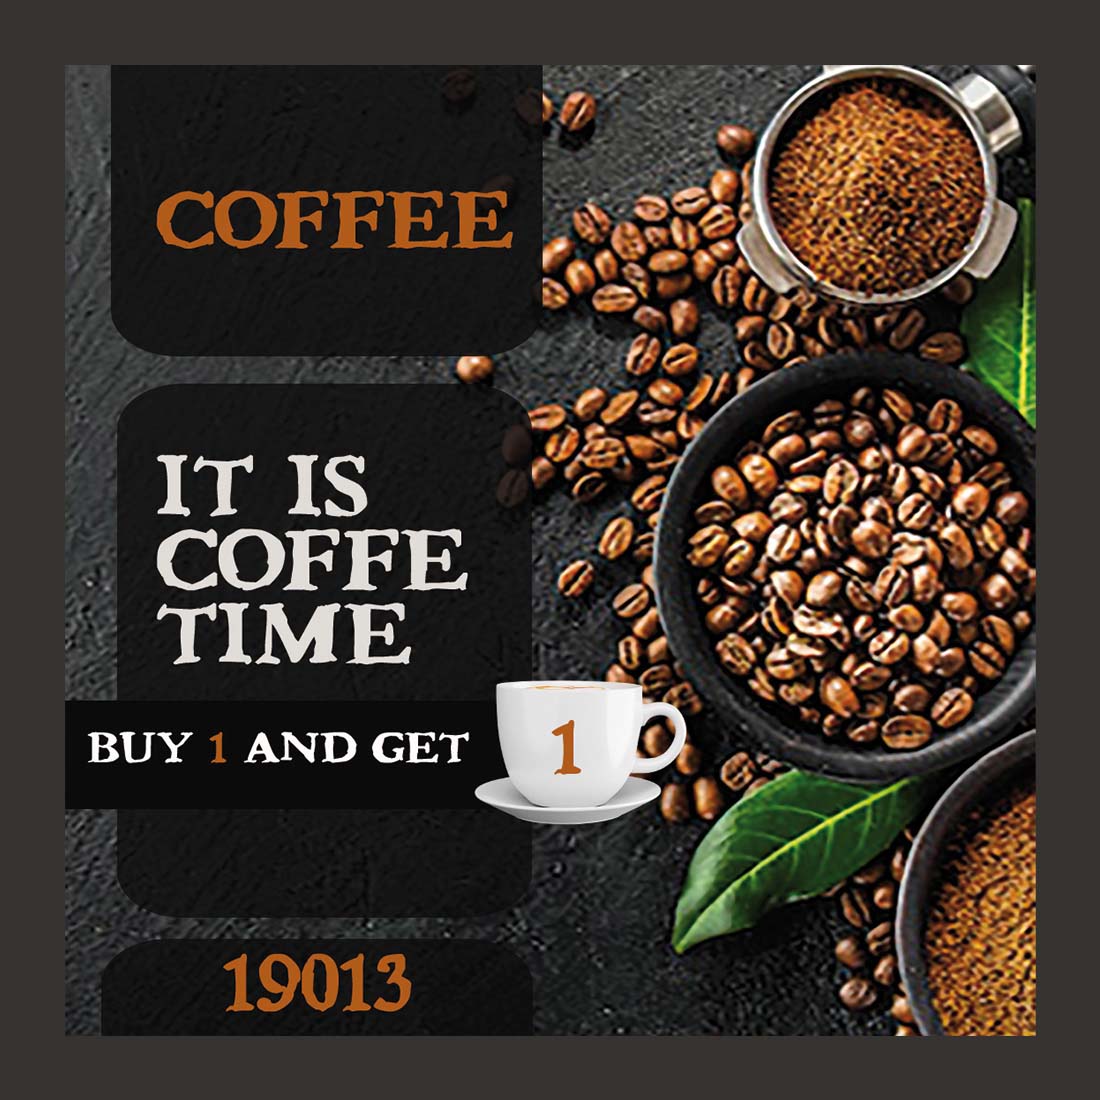 Coffee advertisement with coffee beans and a cup of coffee.